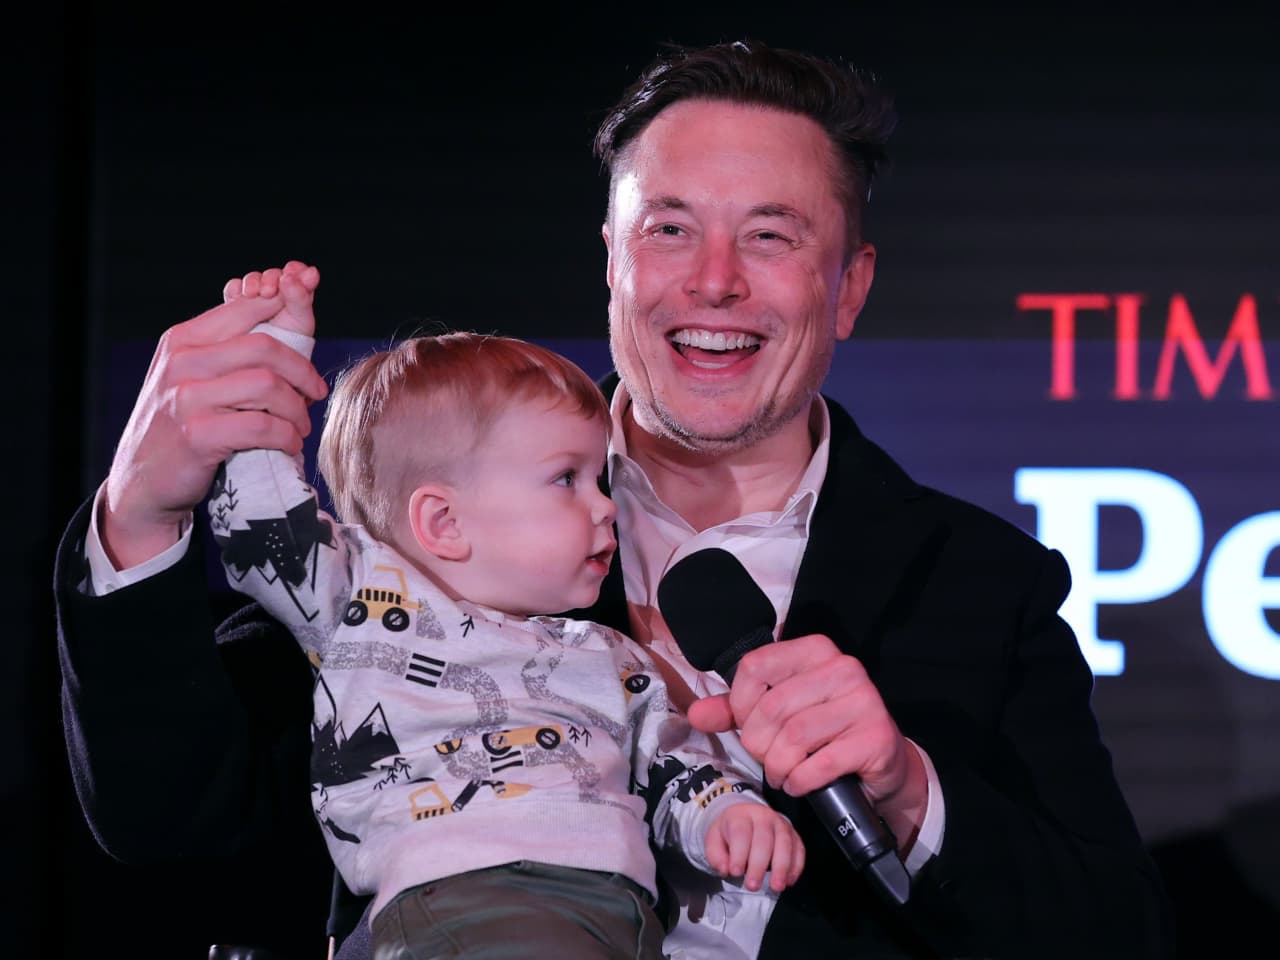 Elon Musk Appears to Have Confirmed the Birth of Twins with Shivon Zilis.